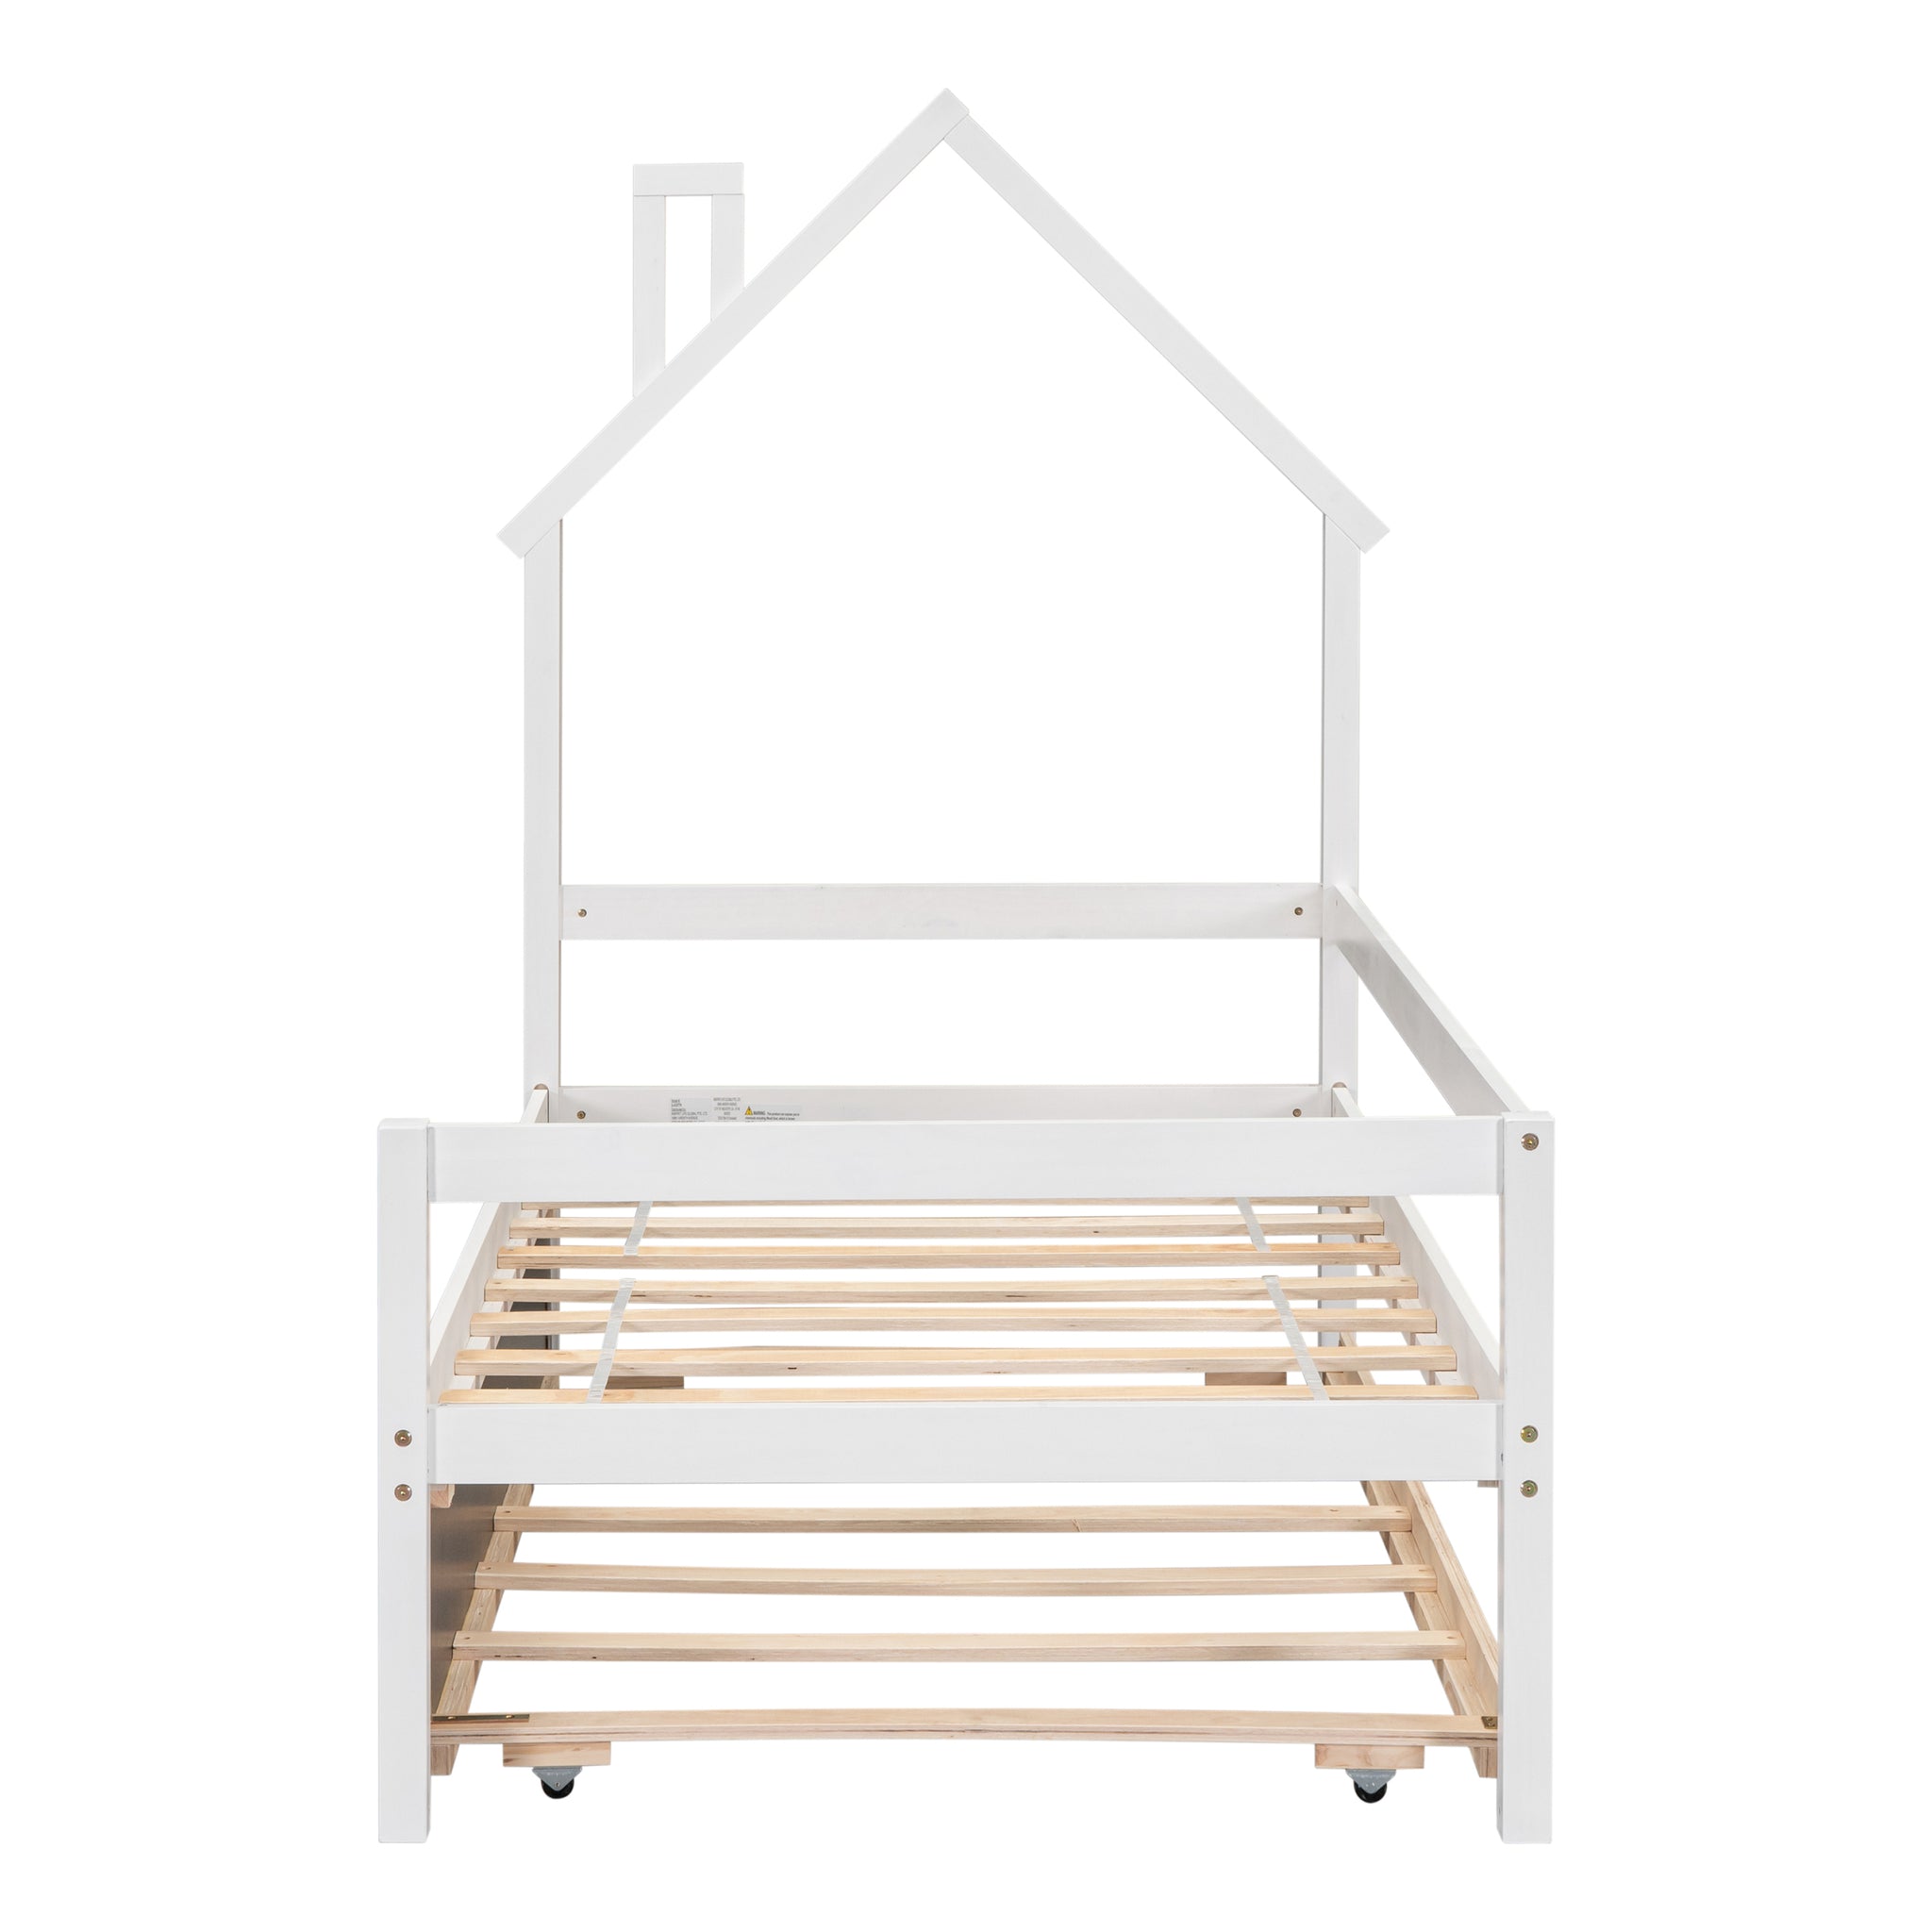 Twin House Wooden Daybed with trundle, Twin House twin-white-wood-bedroom-american design-pine-pine